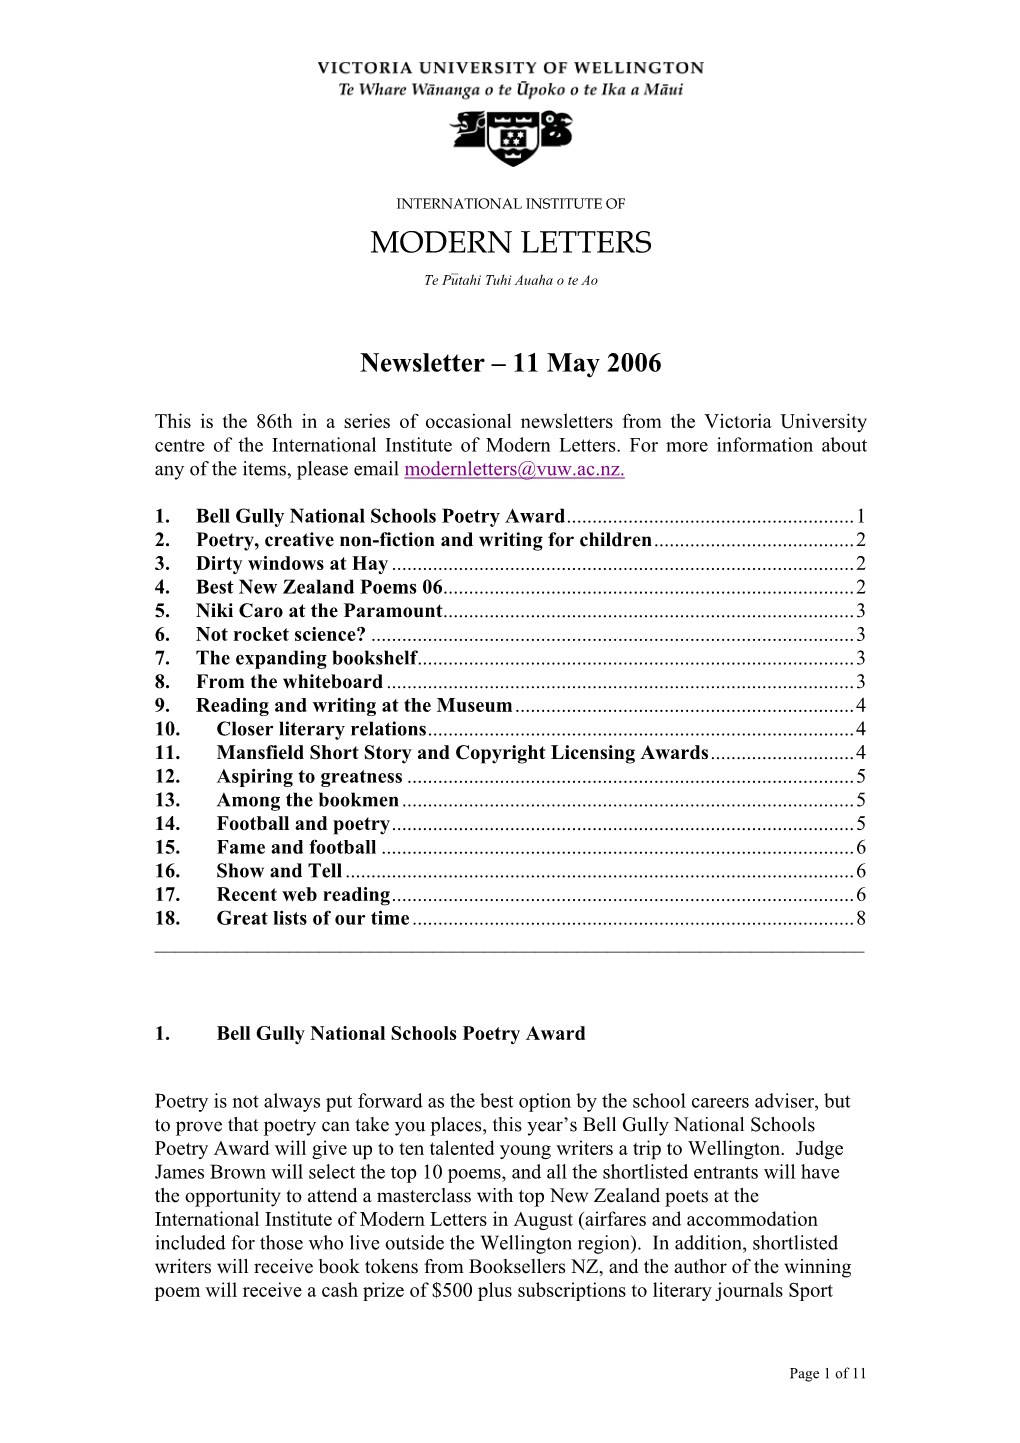 Newsletter – 11 May 2006